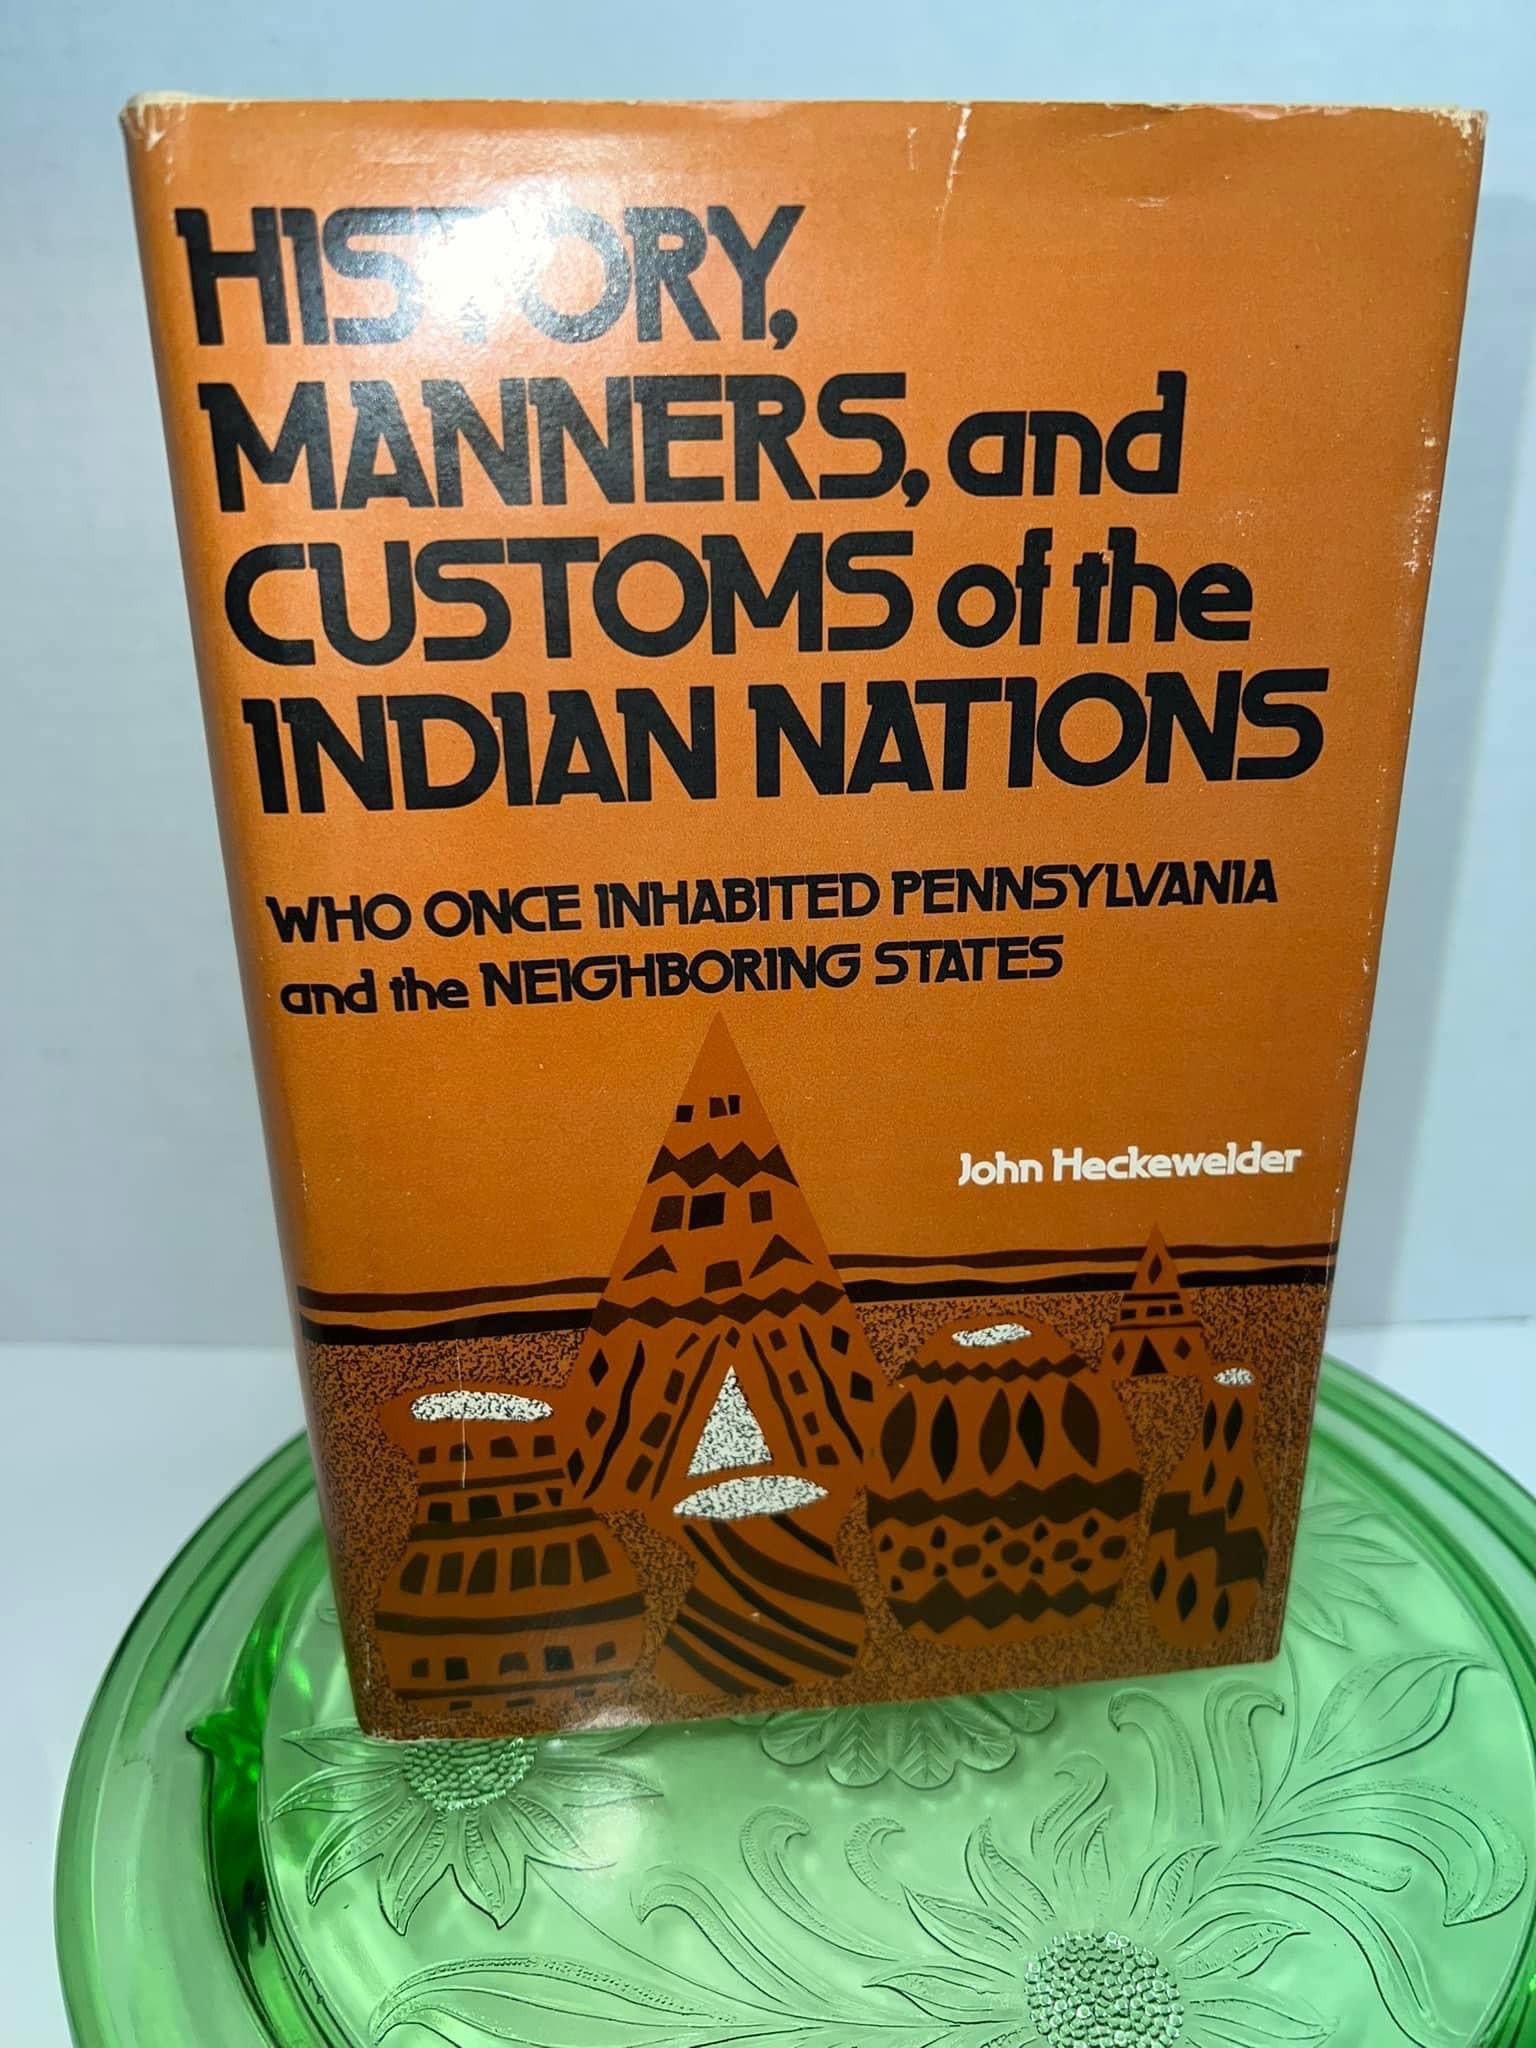 Pennsylvania native Americans History manners and customs of the Indian nations who once inhabited Pennsylvania and the neighboring states